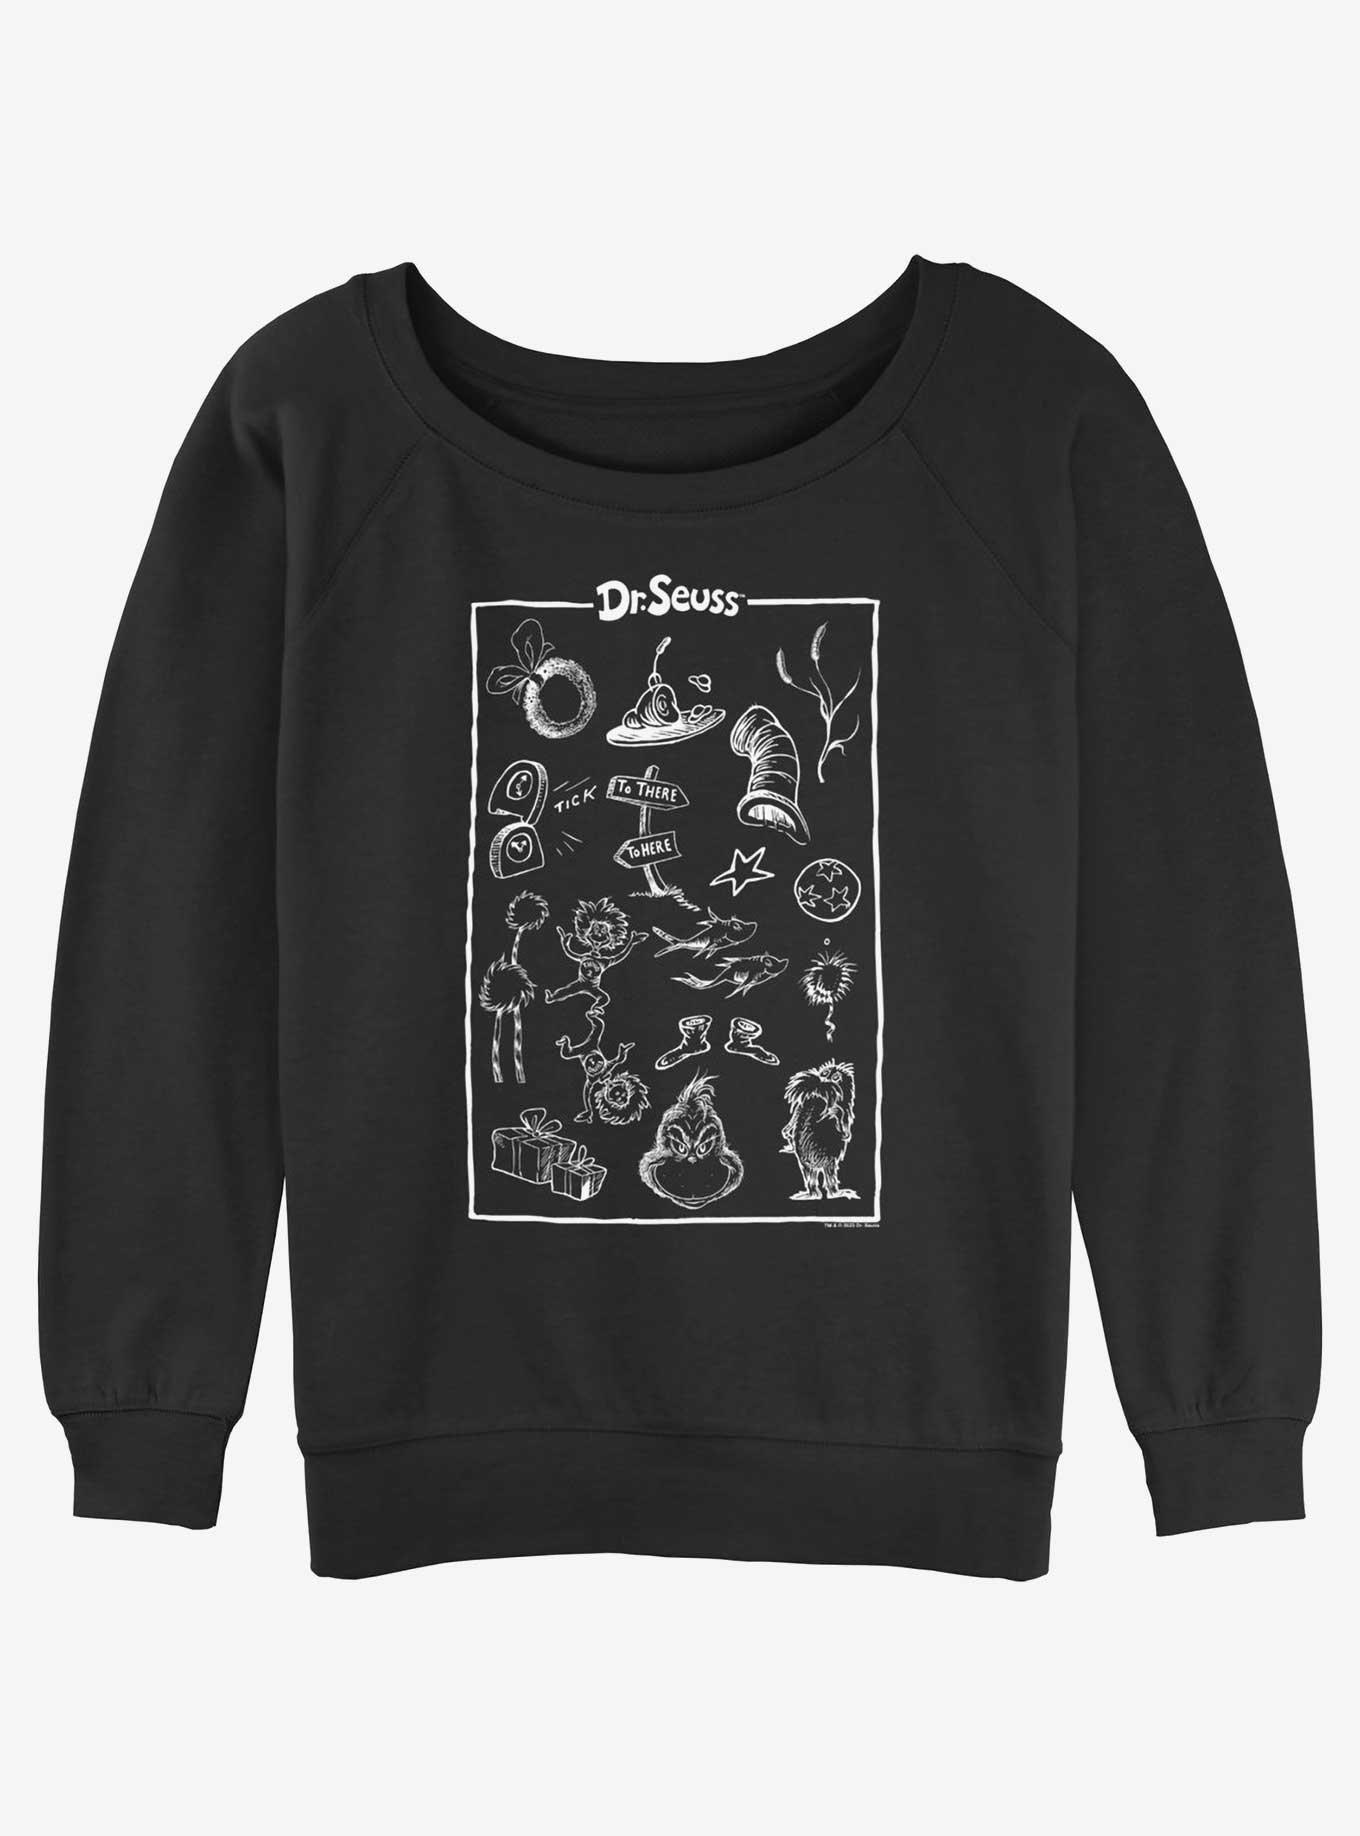 Dr. Seuss Collection Poster Womens Slouchy Sweatshirt, BLACK, hi-res